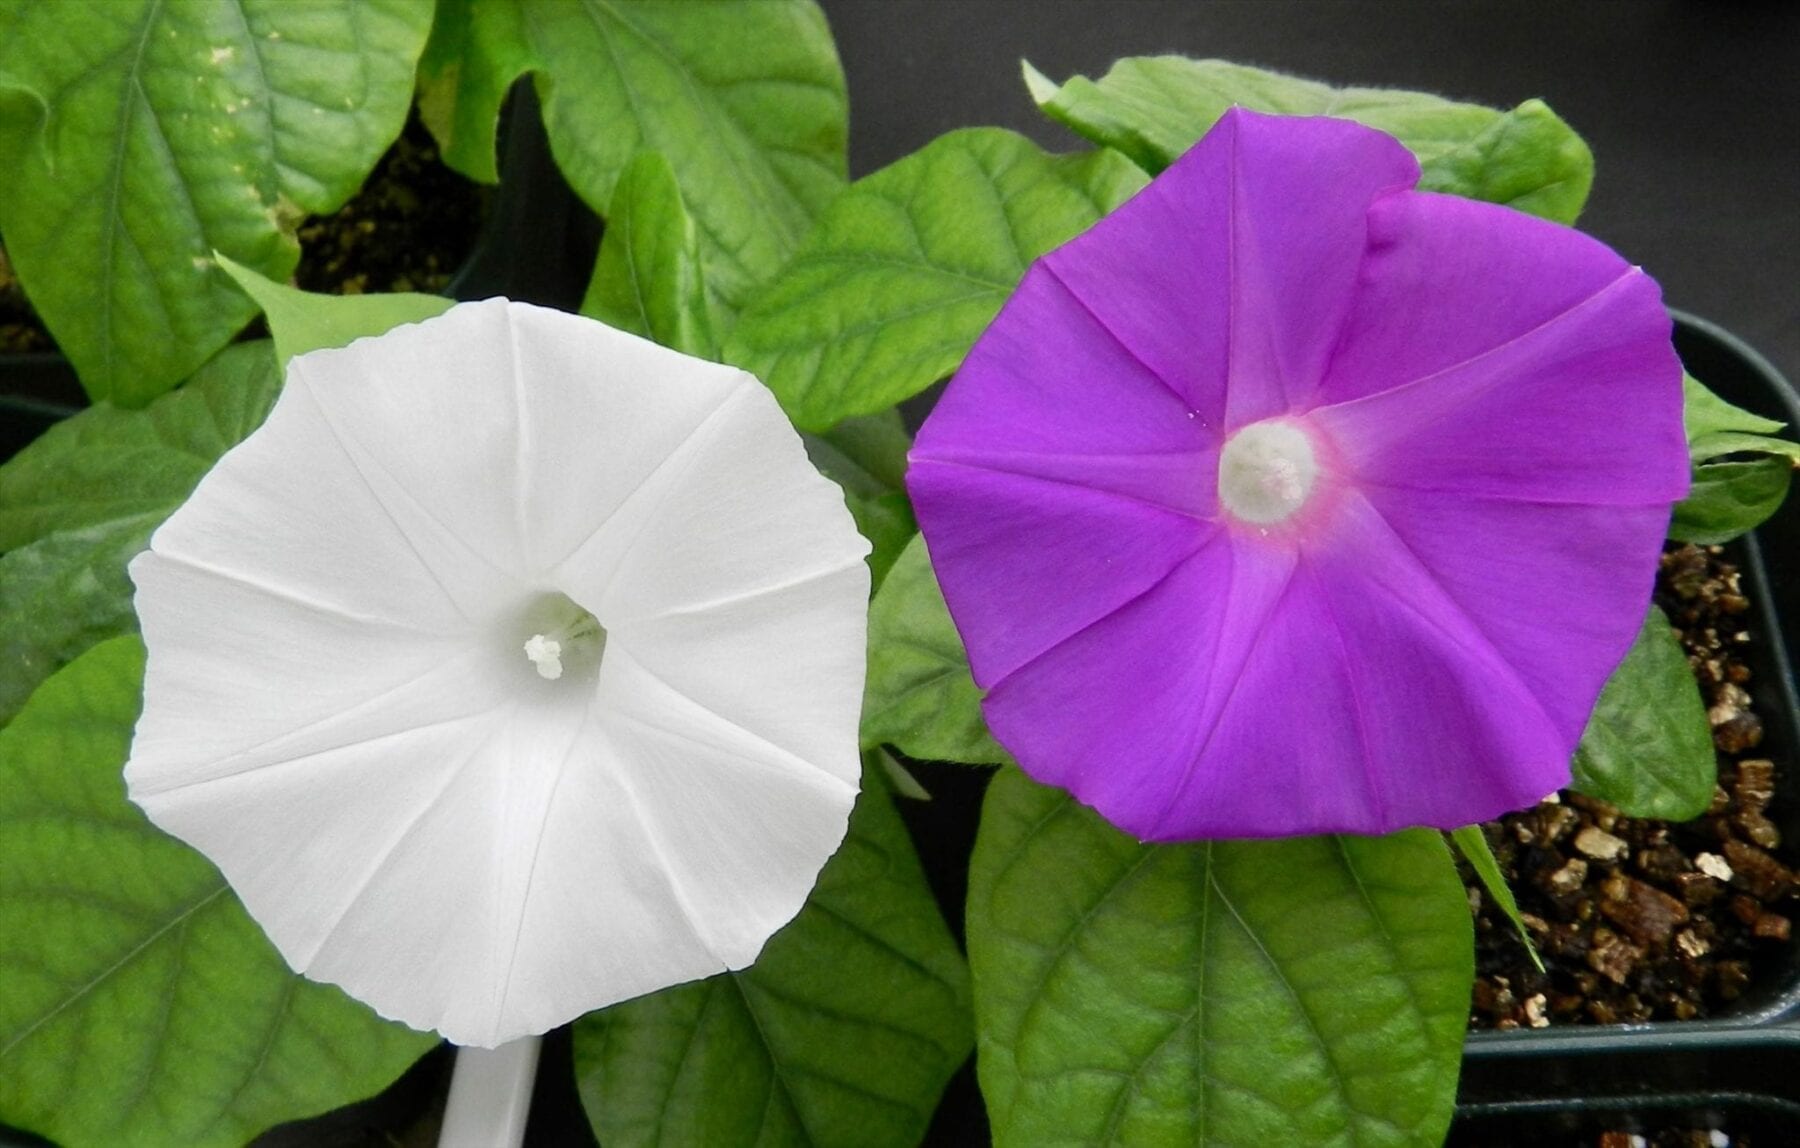 In a world-first, CRISPR/Cas9 is used to change flower color